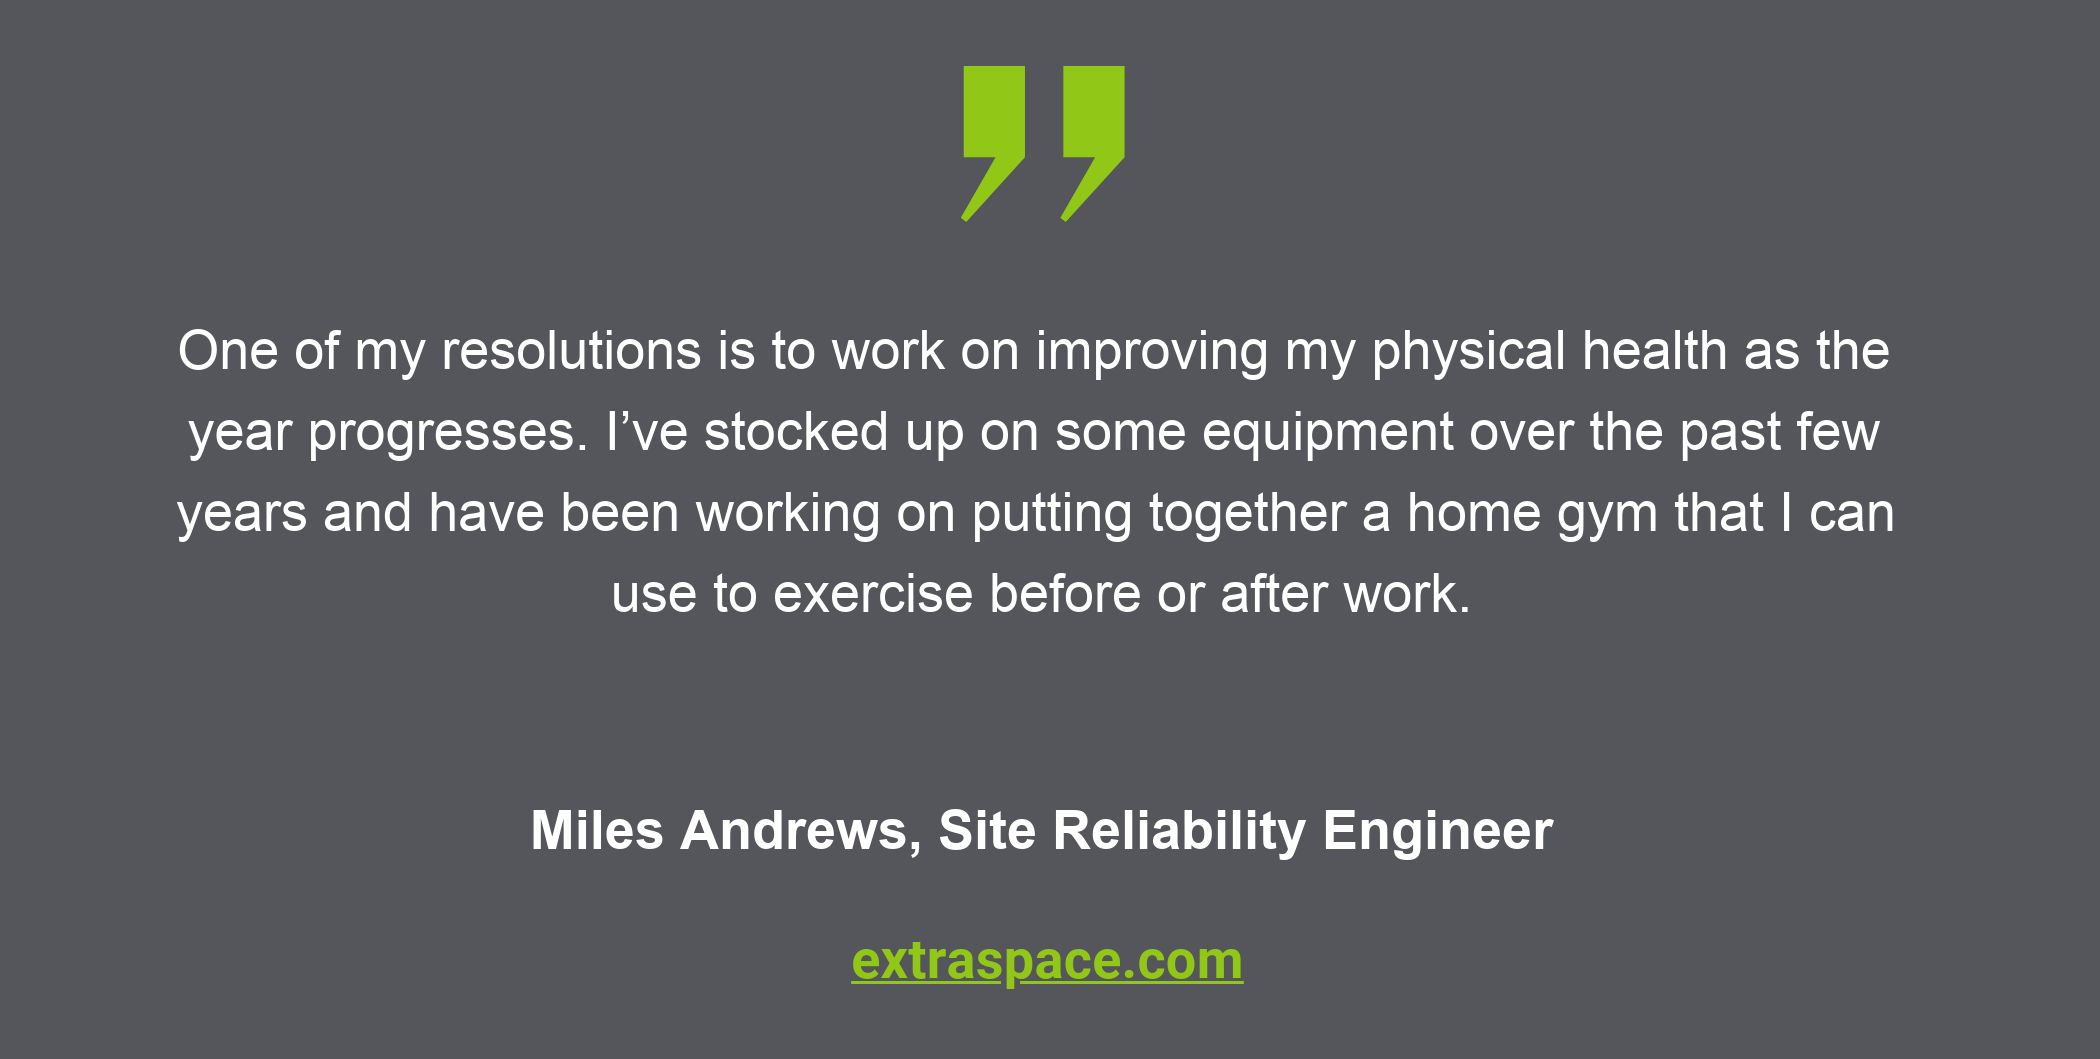 Miles Andrews, Site Reliability Engineer - 2022 Resolutions